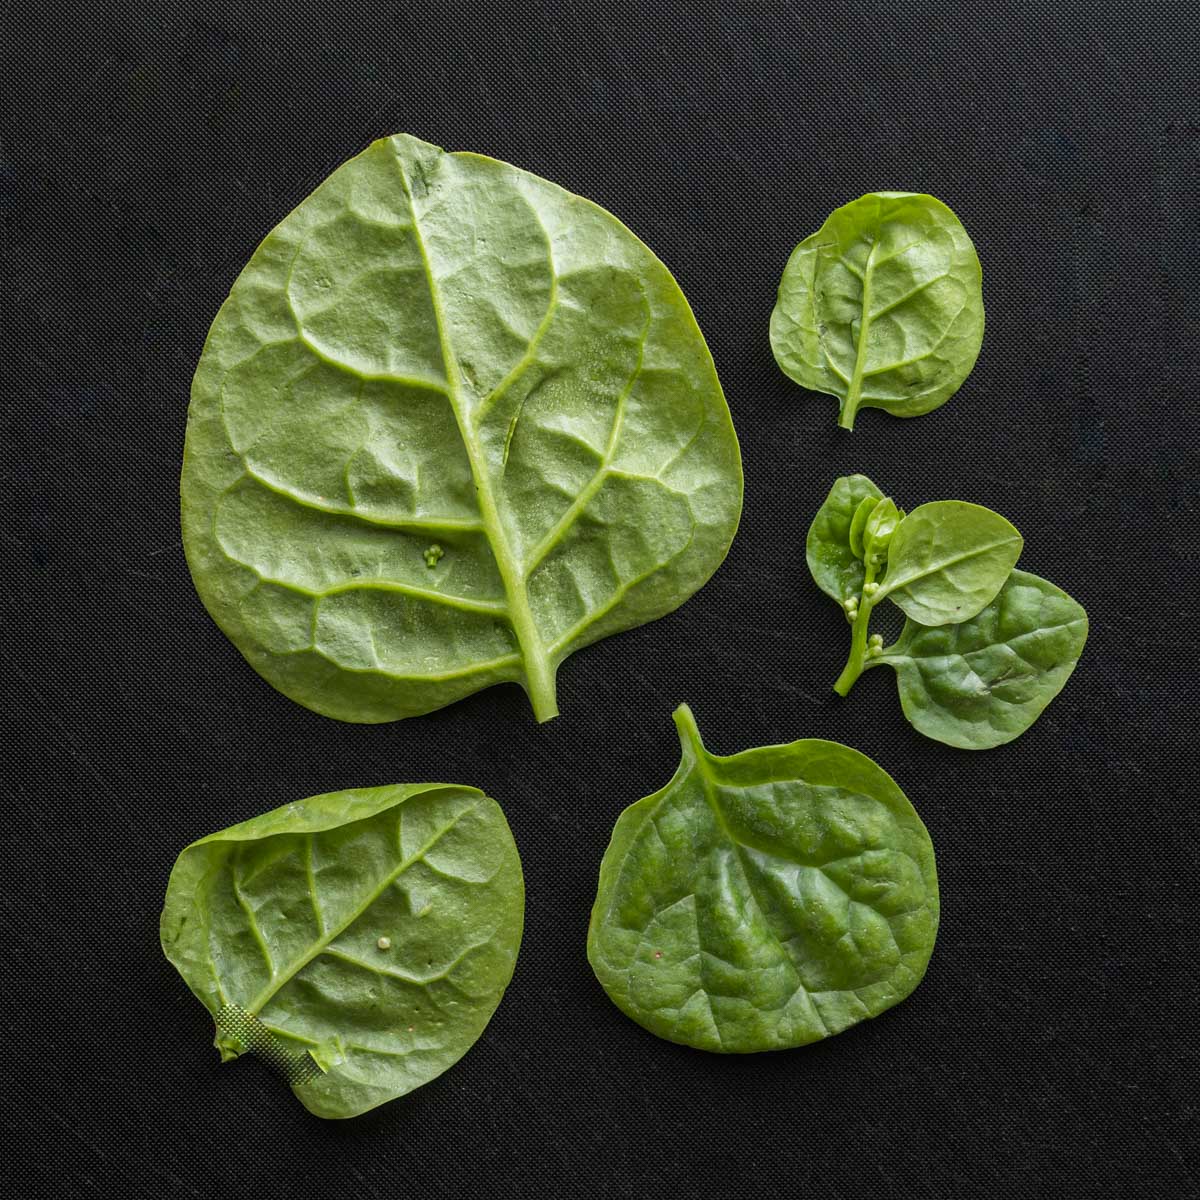 Malabar spinach leaves removed from the stem on a black background. 